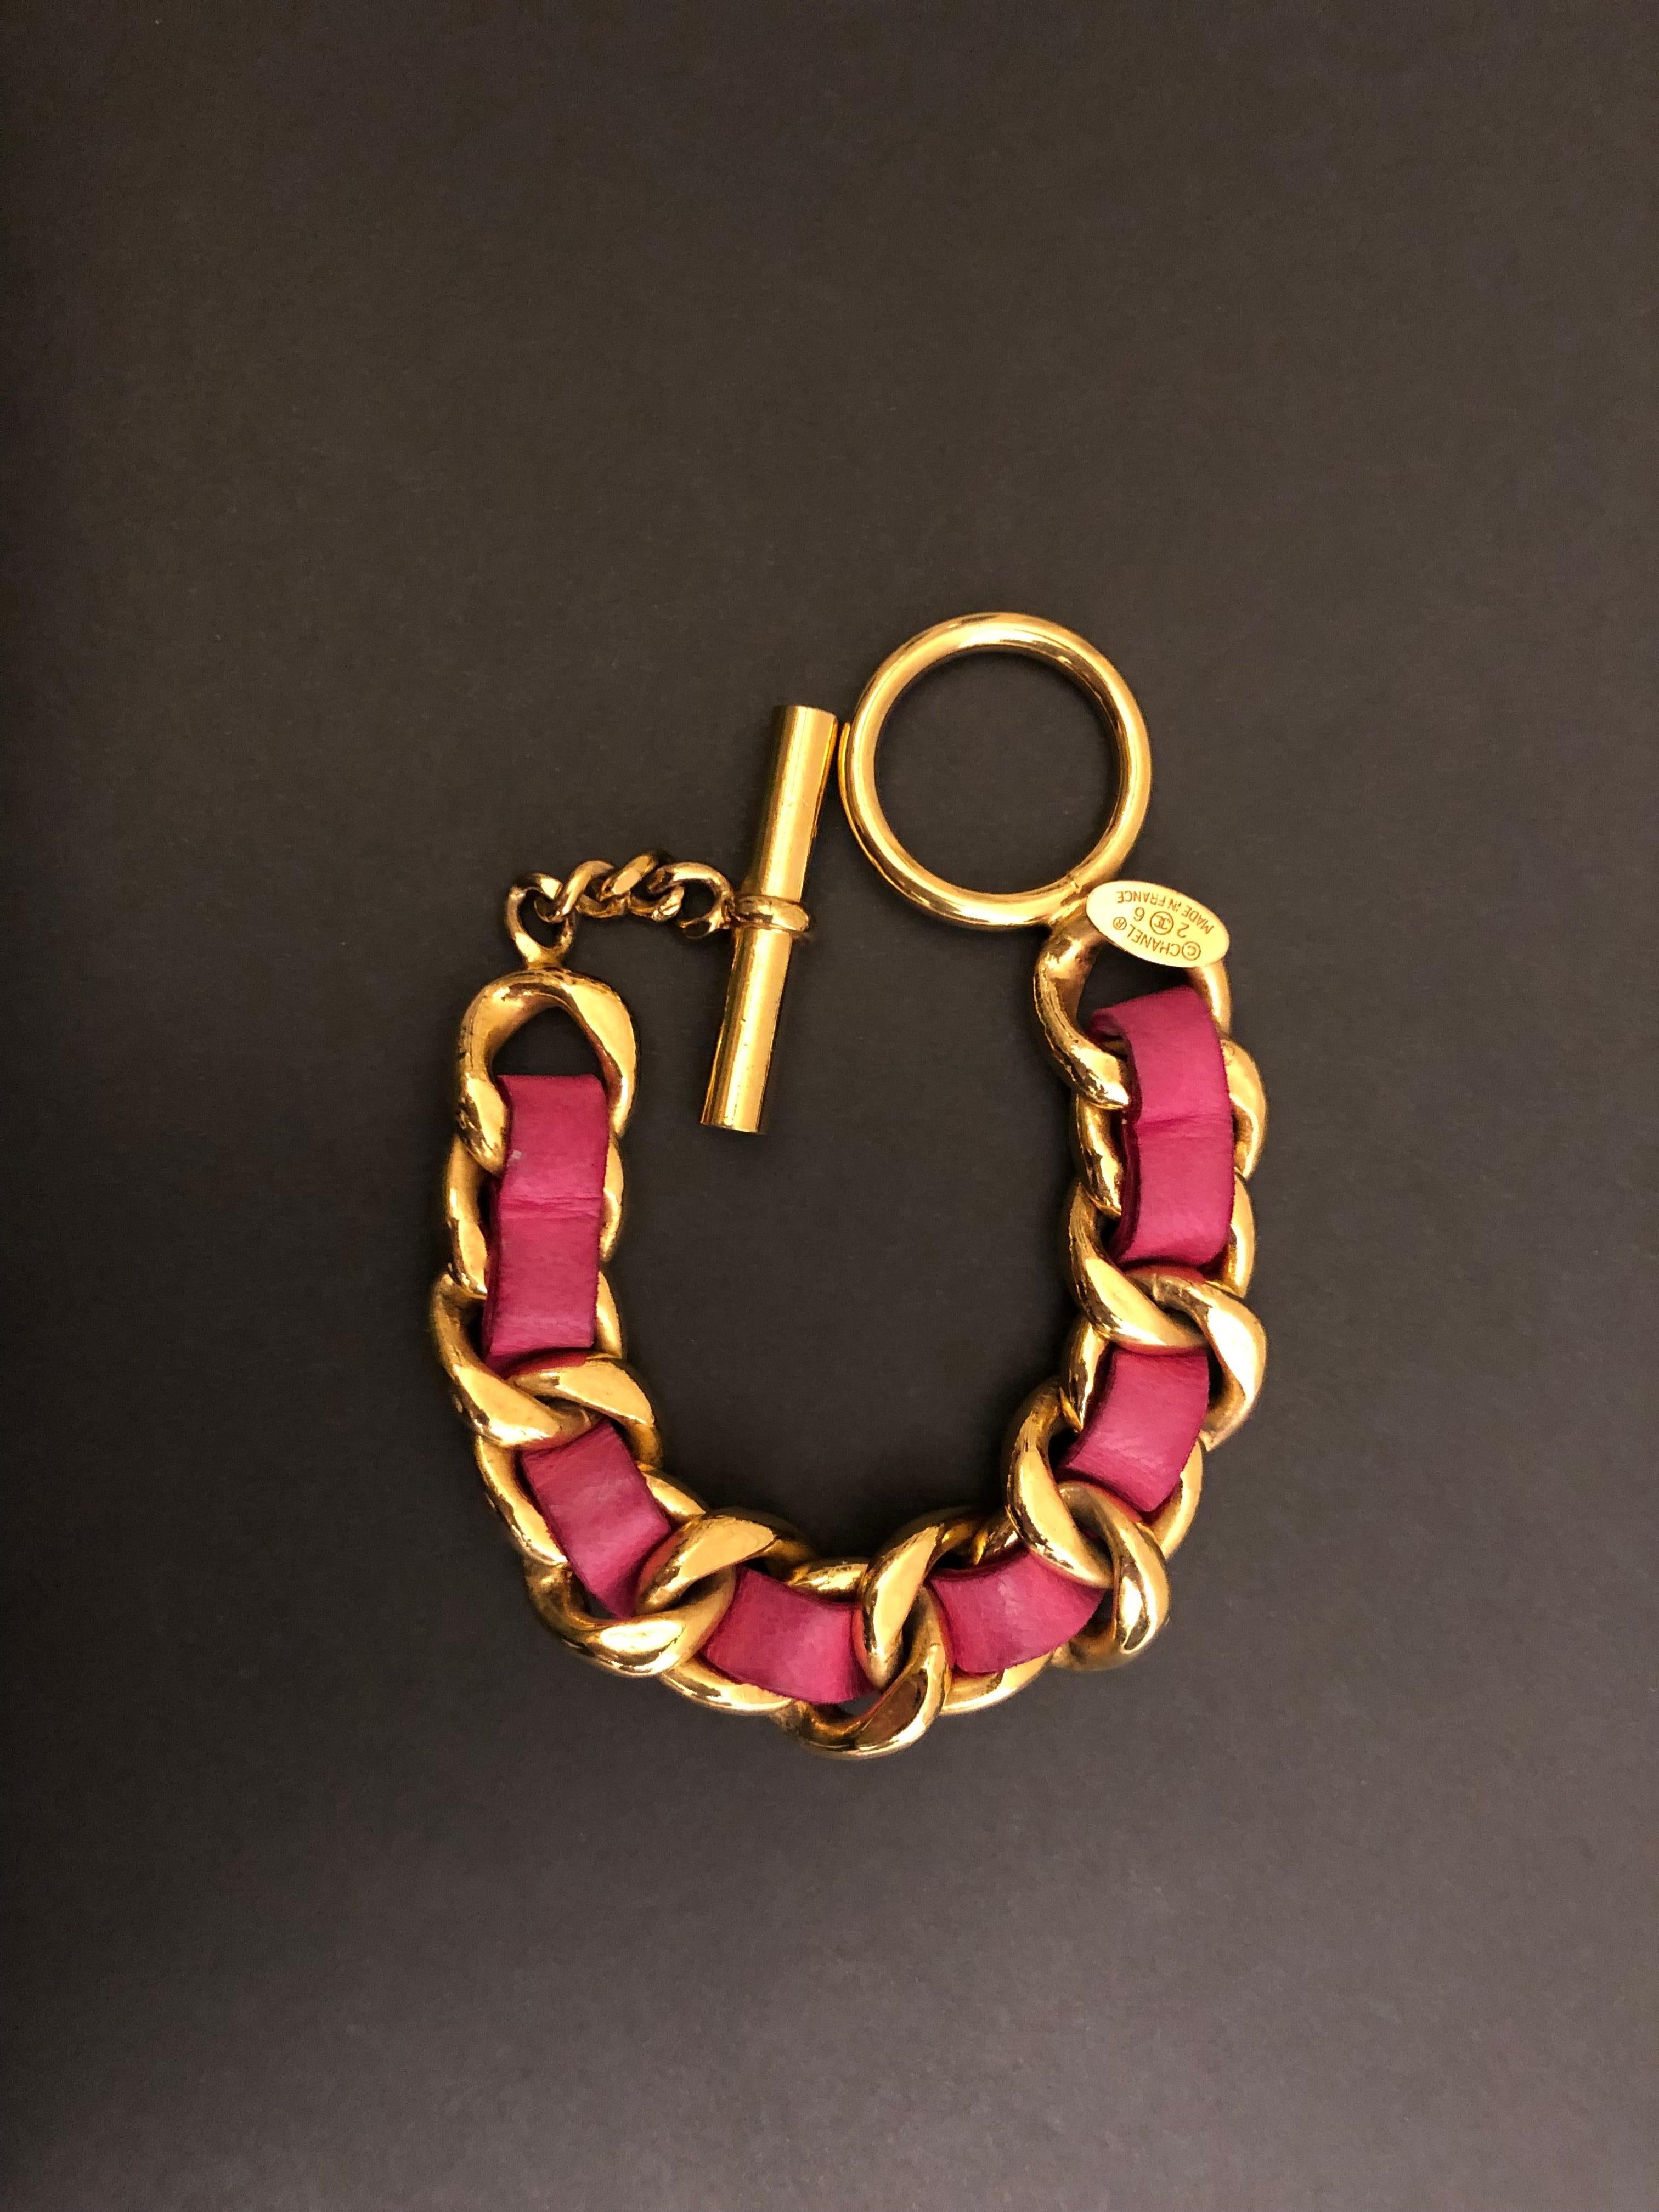 Vintage Chanel gold toned chain link bracelet interlaced with pink lambskin leather. Adjustable toggle fastening. Stamped CHANEL 26, made in France. Measures approximately 16 - 18 cm. Comes with box.

Condition: Some marks and discoloration on